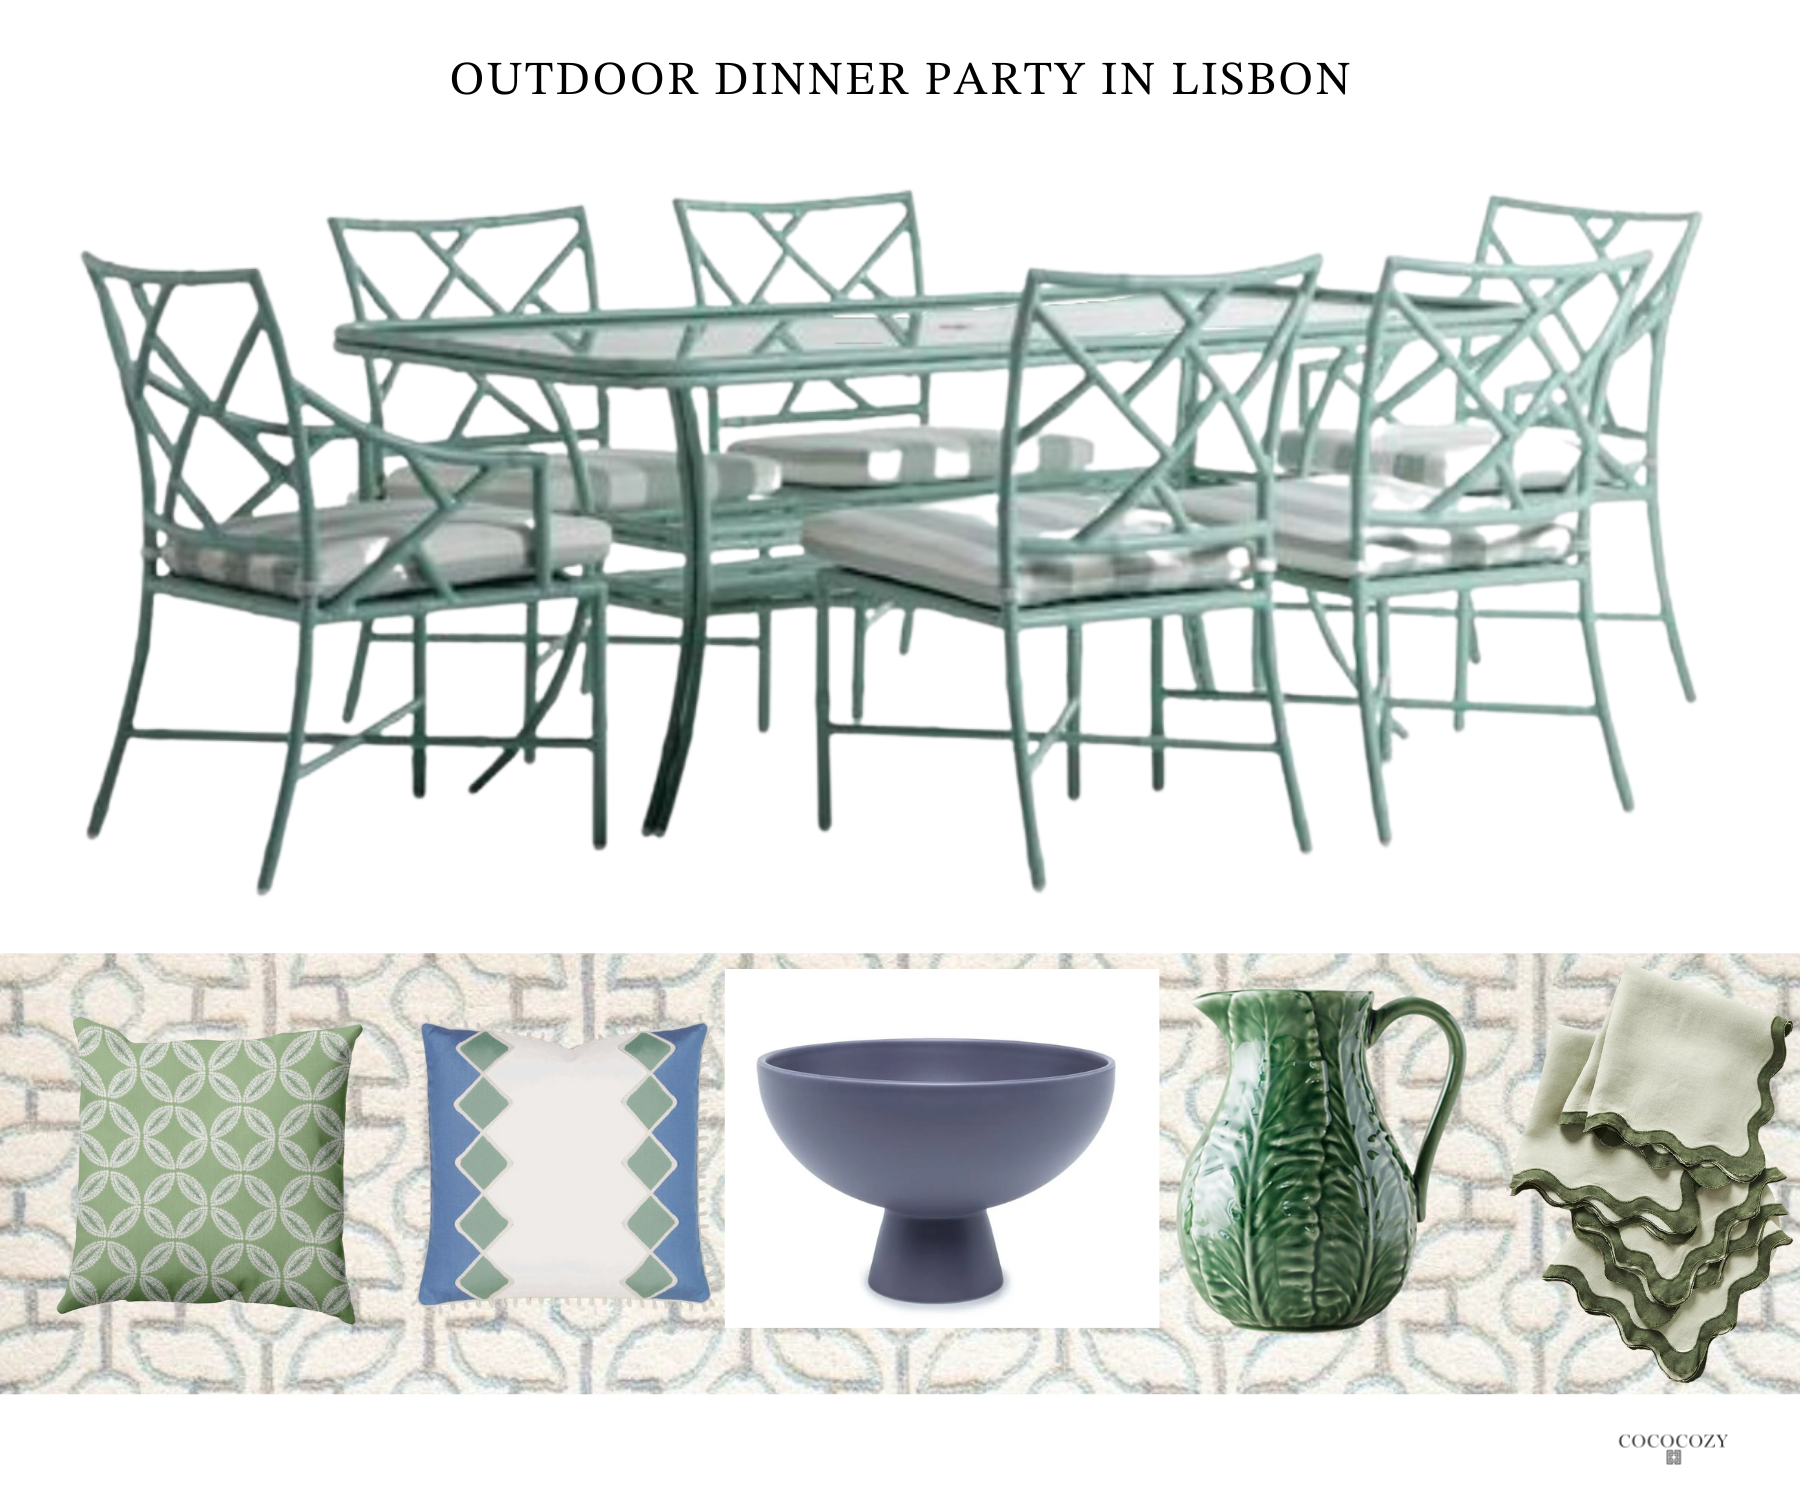 Alt tag for outdoor dinner party in lisbon